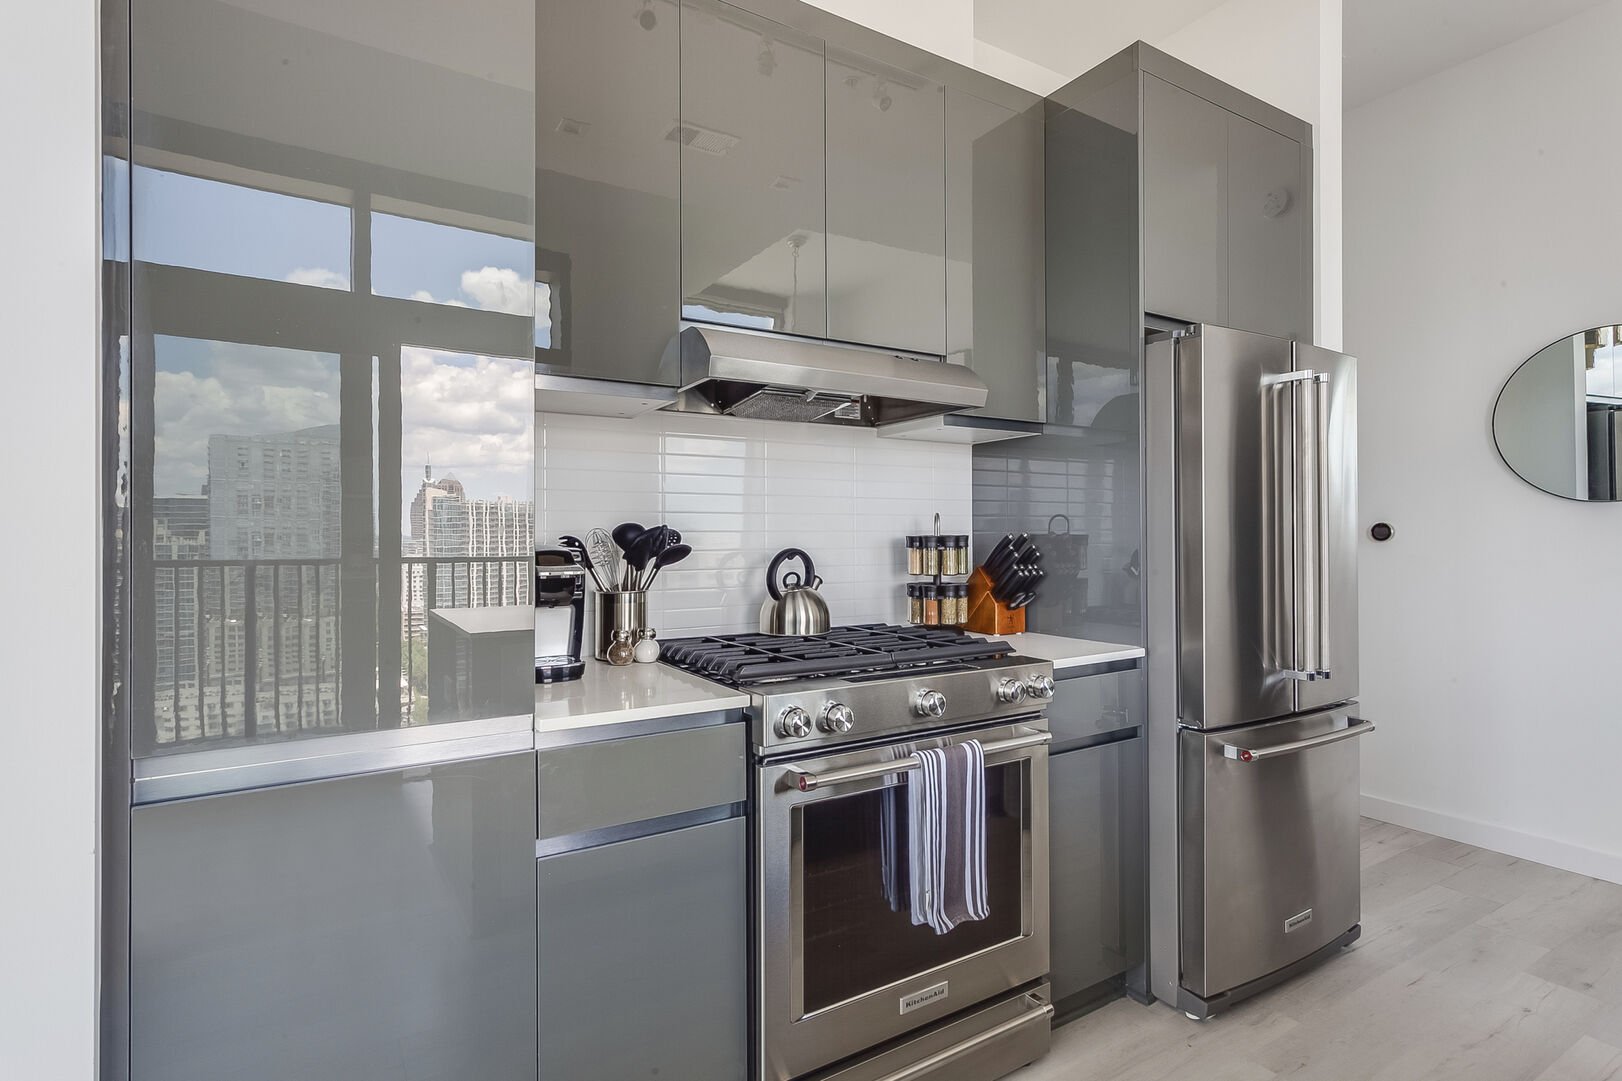 The Kitchen Includes Stainless Steel Appliances.